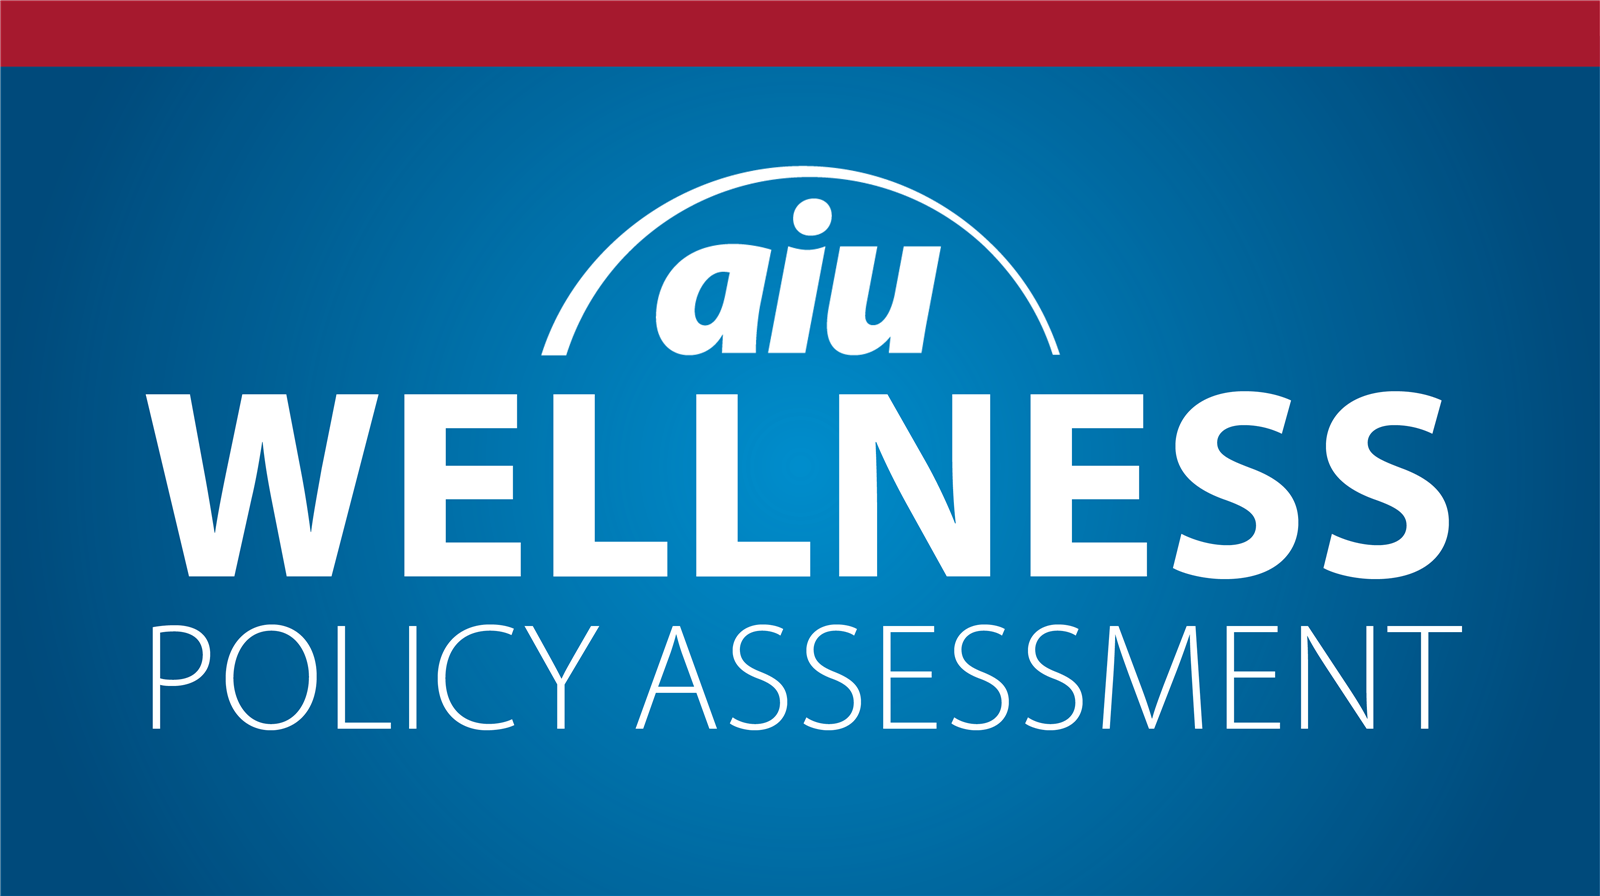  Wellness Policy Assessment